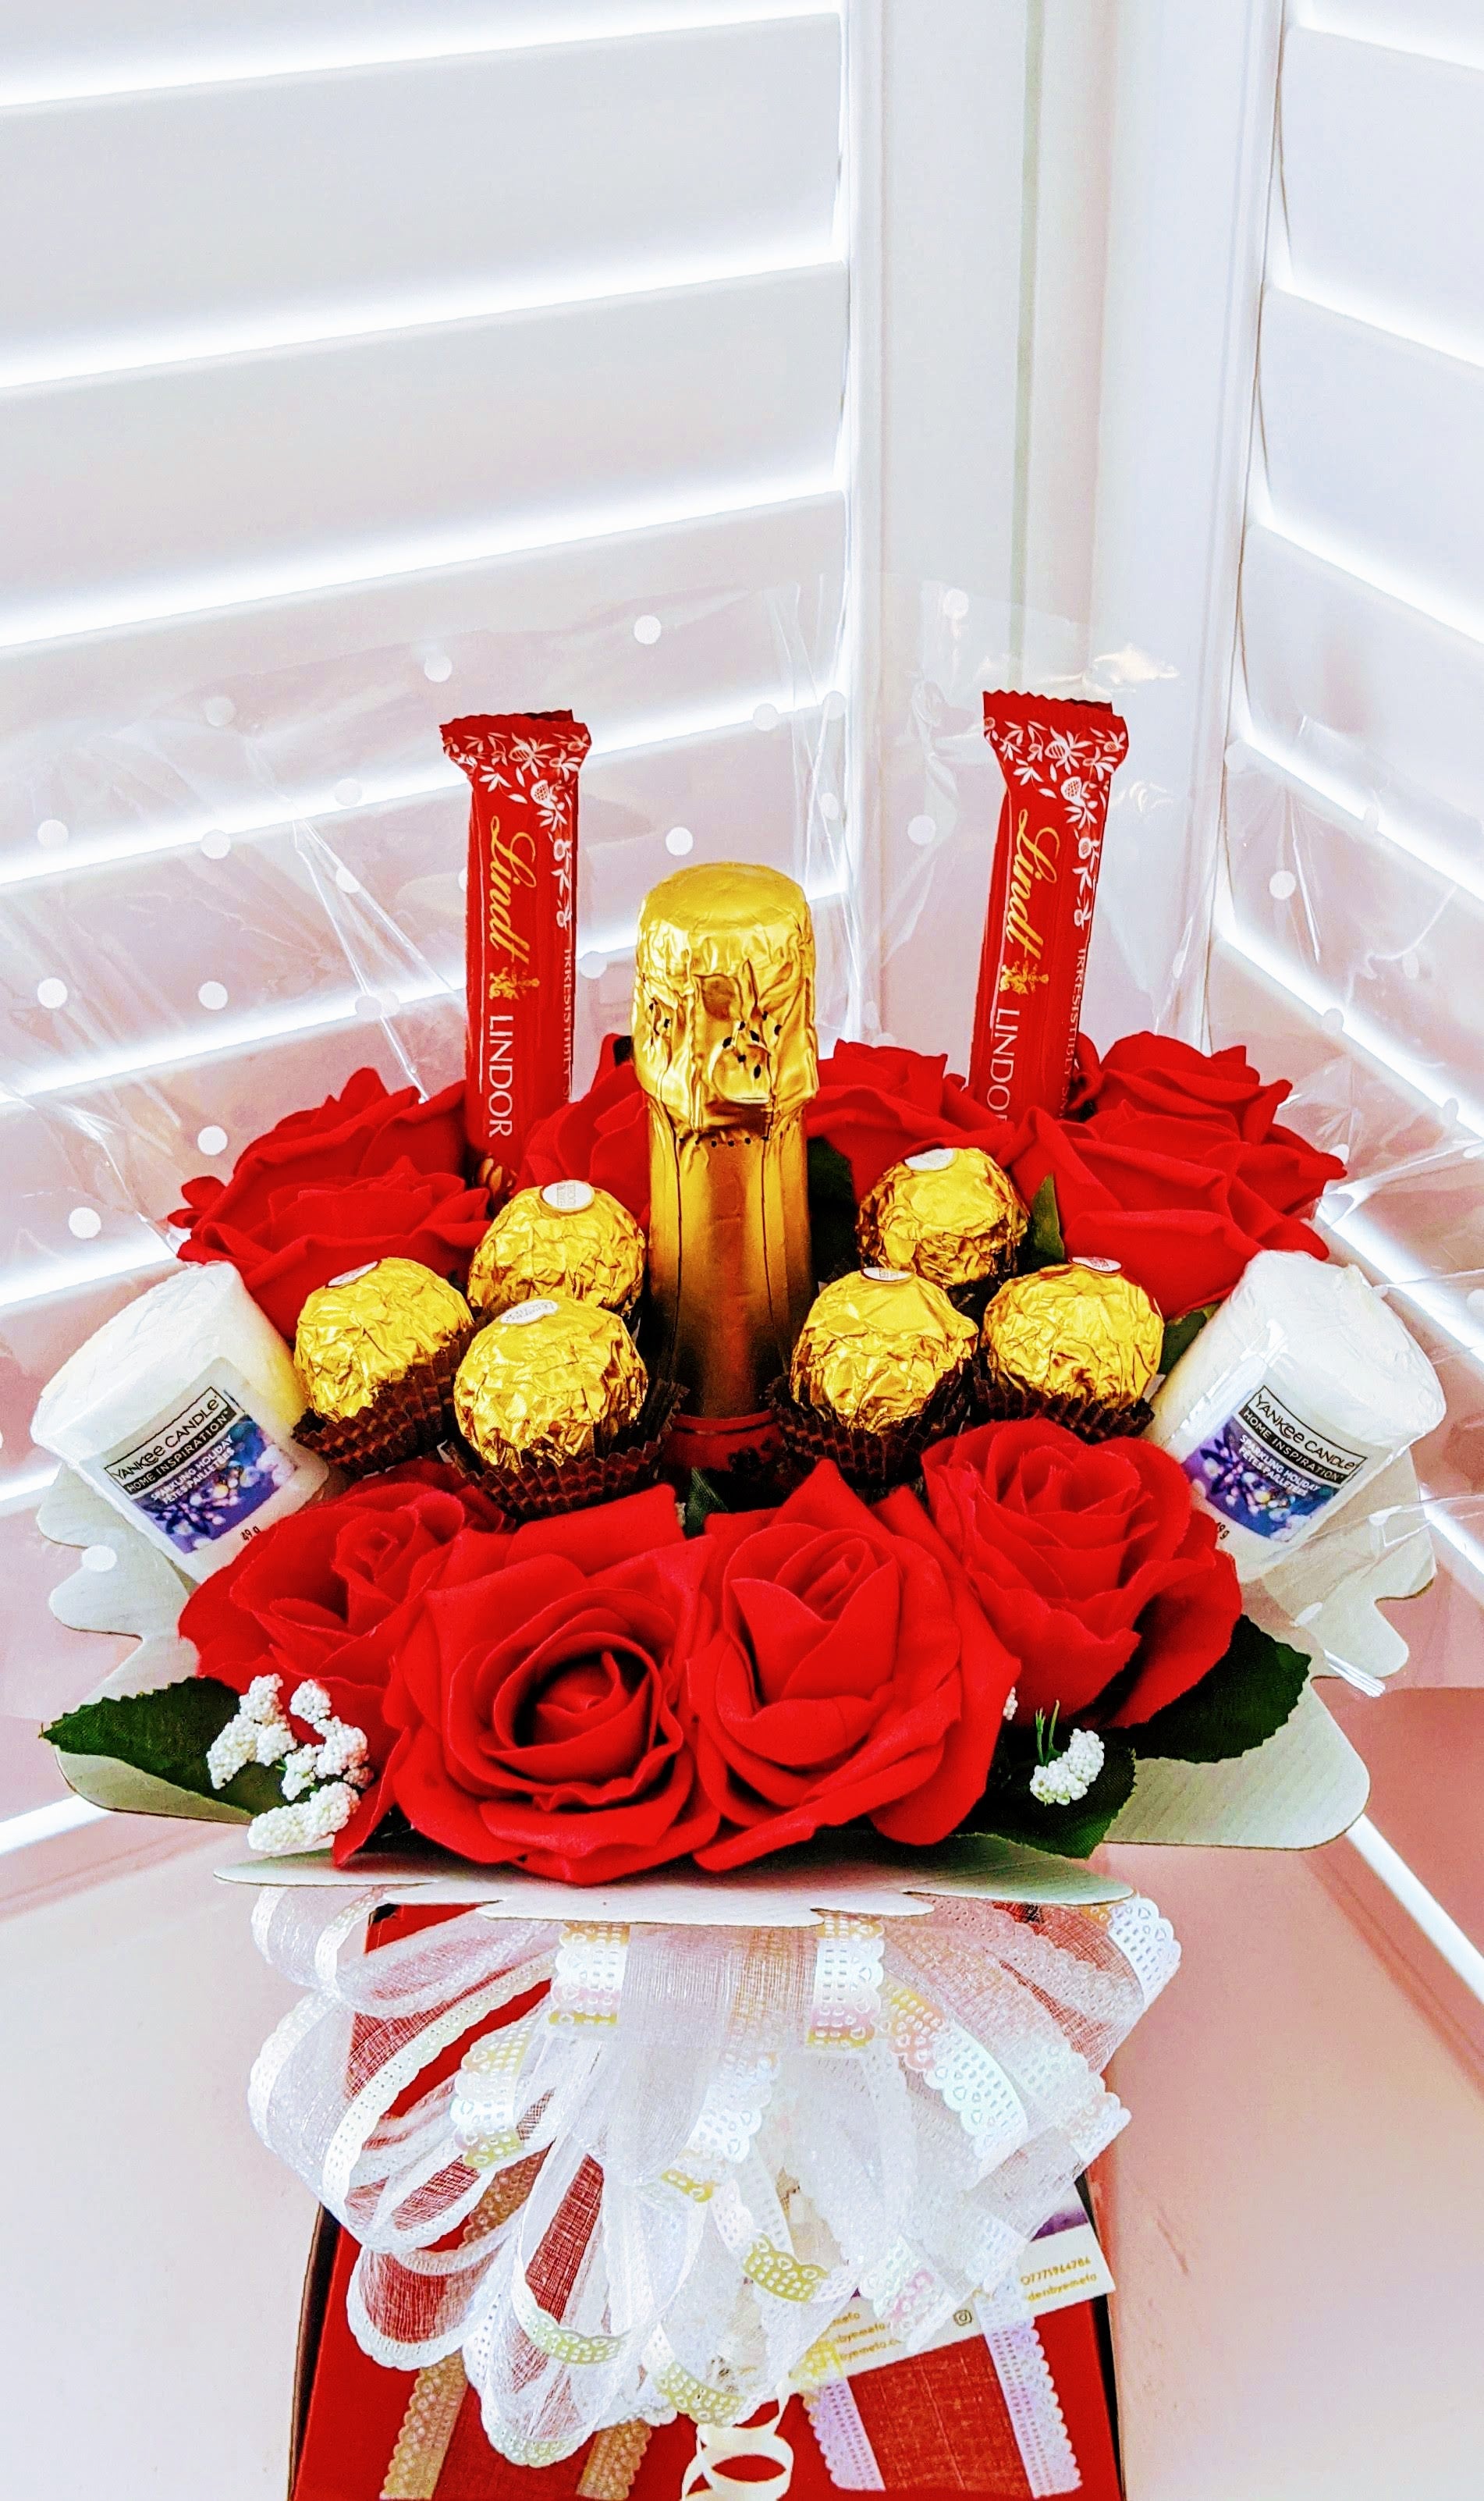 Prosecco Yankee Candles Floral Chocolate Bouquets for any occasion in UK